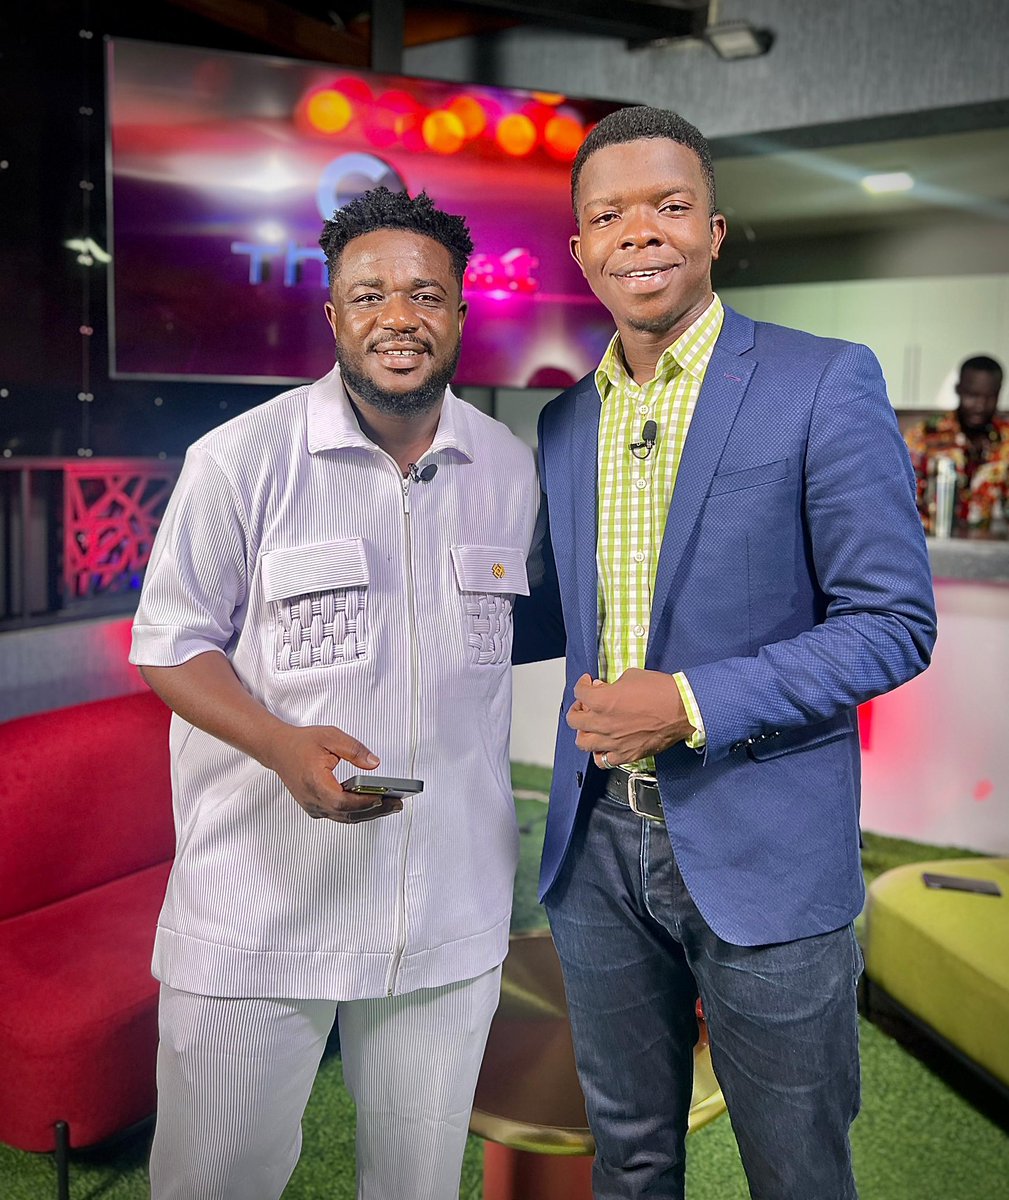 @pk_koomsonn was joined by the 'Hewale Lala' hitmaker, @perezmusik233 , for an exciting chat on Citi TV! In regards to his upcoming event dubbed ‘Display the Move 3.0 Live Worship’